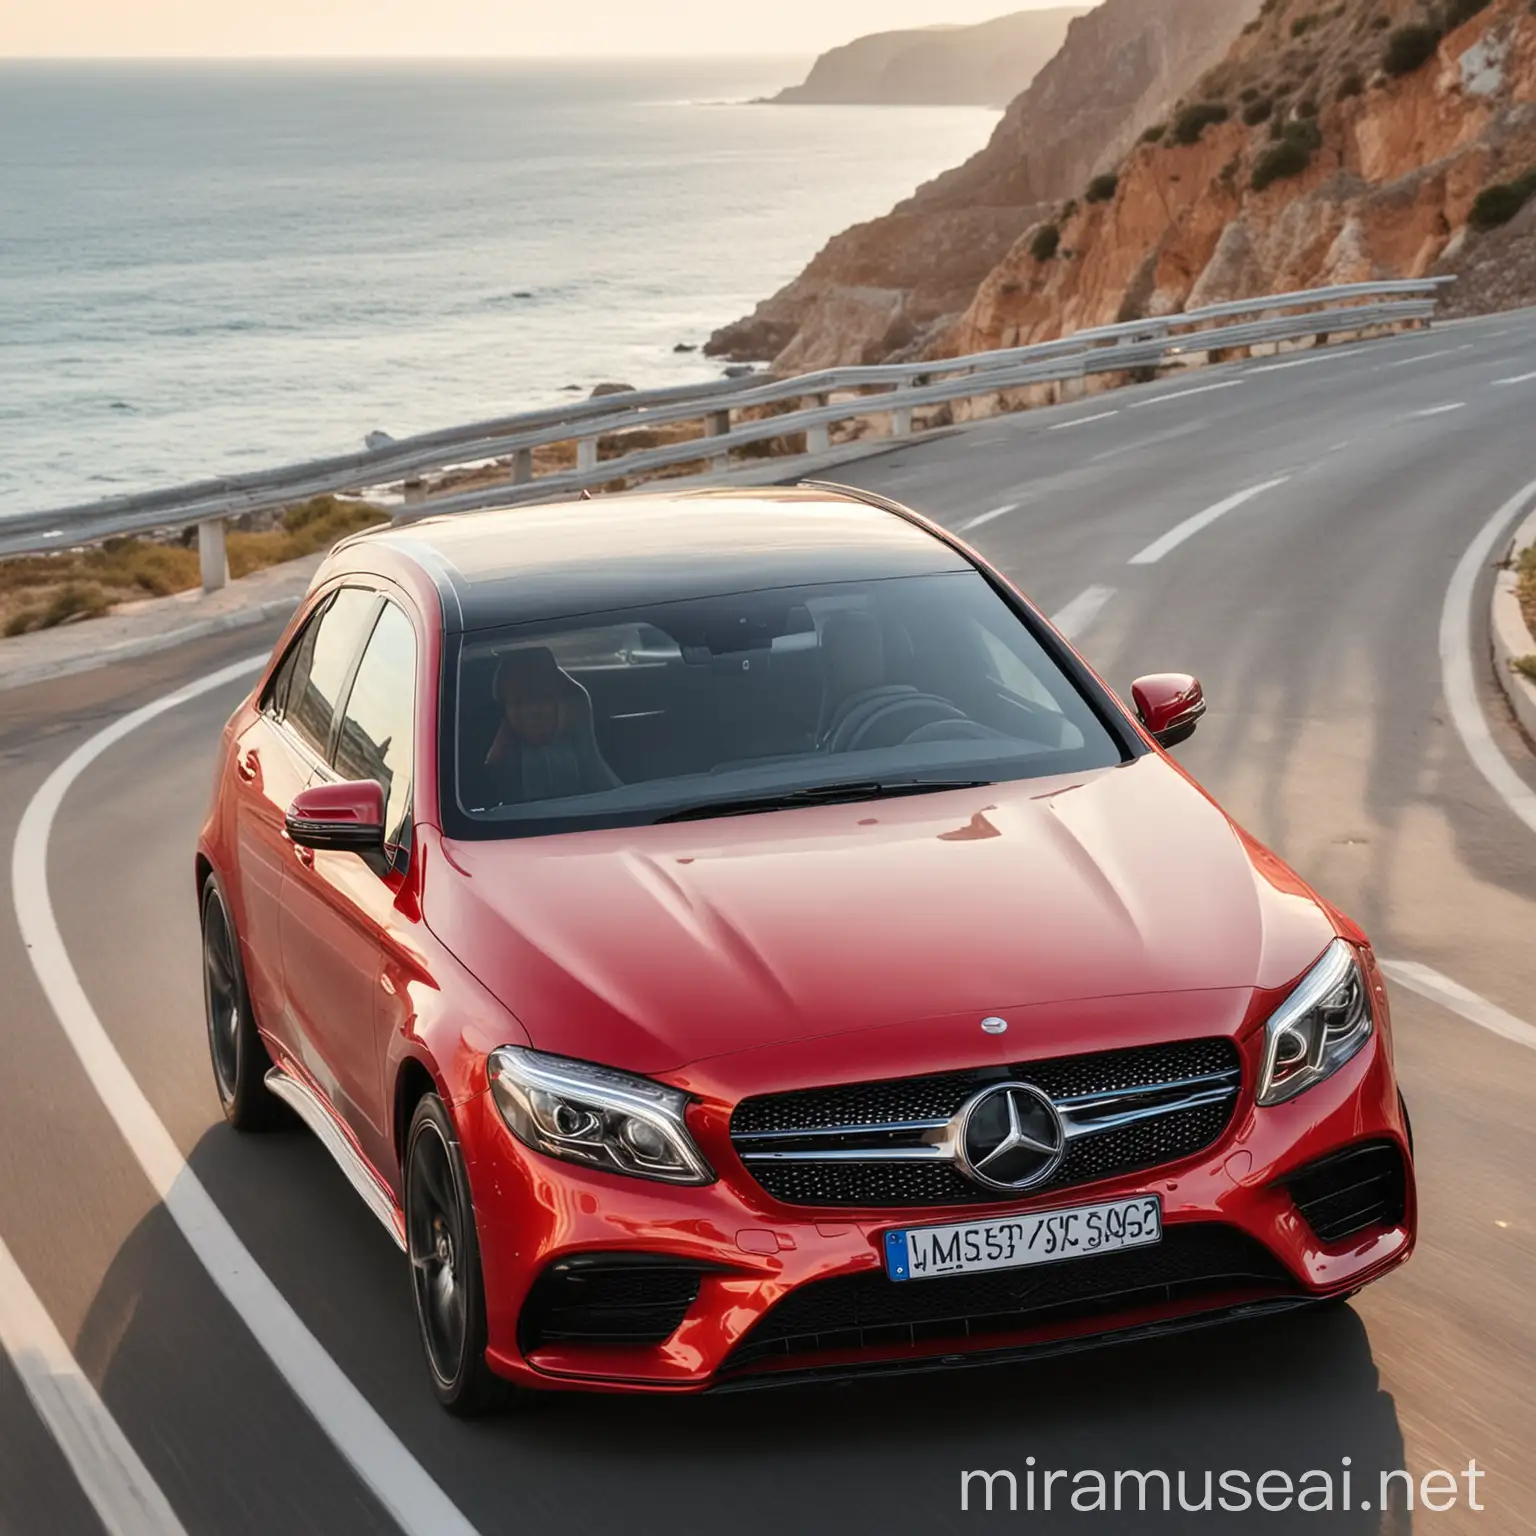 red mercedes going fast on the road near the sea, close up